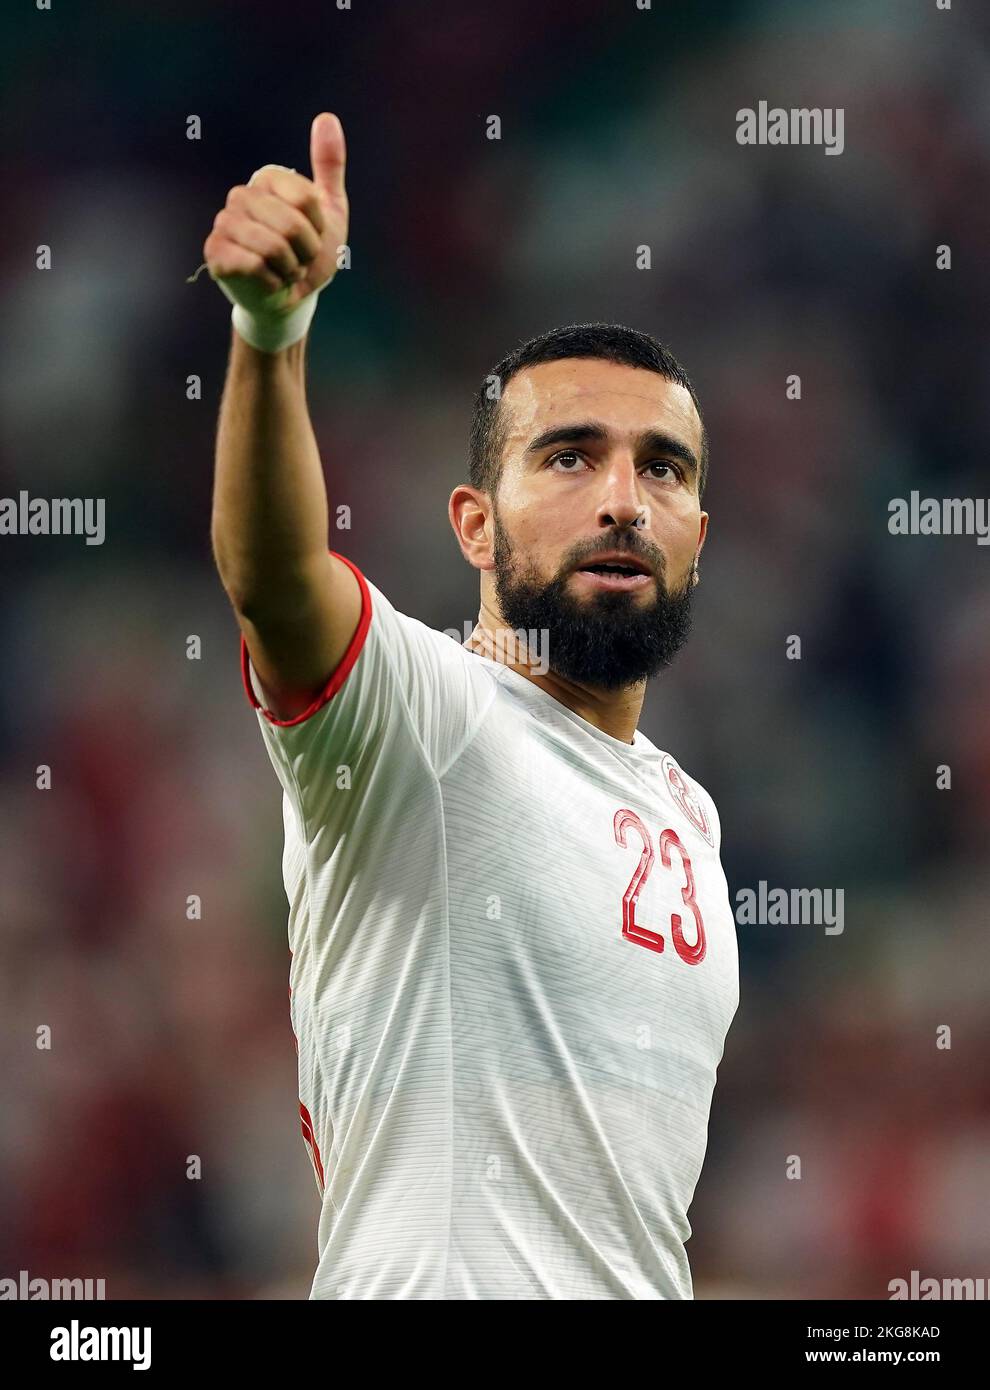 Tunisia’s Naim Sliti gives a thumbs up after the FIFA World Cup Group D match at Education City Stadium, Al Rayyan, Qatar. Picture date: Tuesday November 22, 2022. Stock Photo